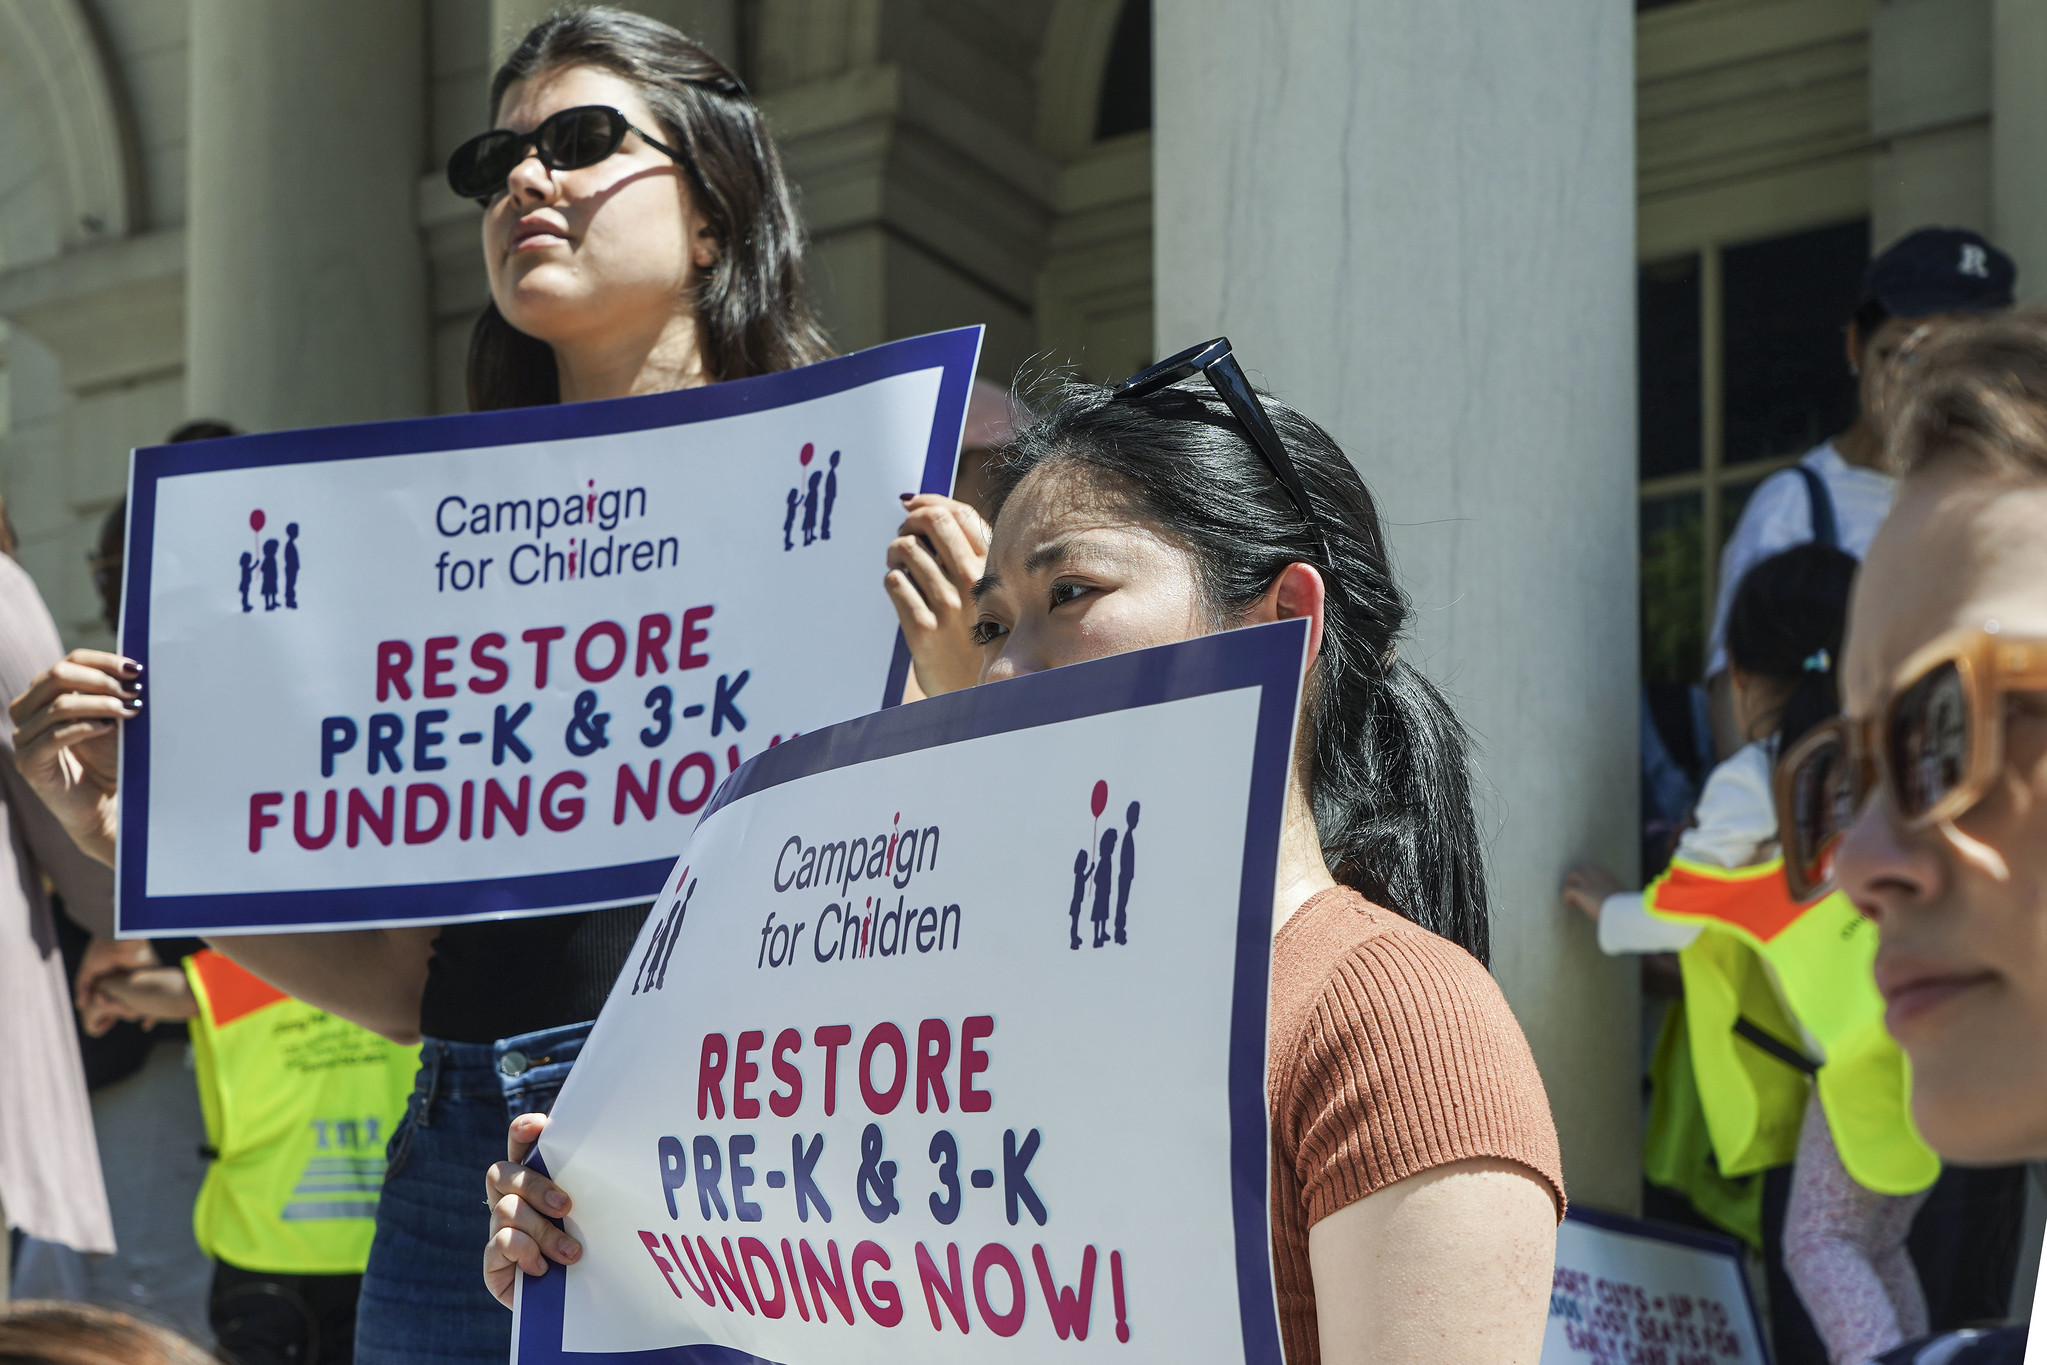 A child and adult hold signs calling for the restoration of early childhood education funding.